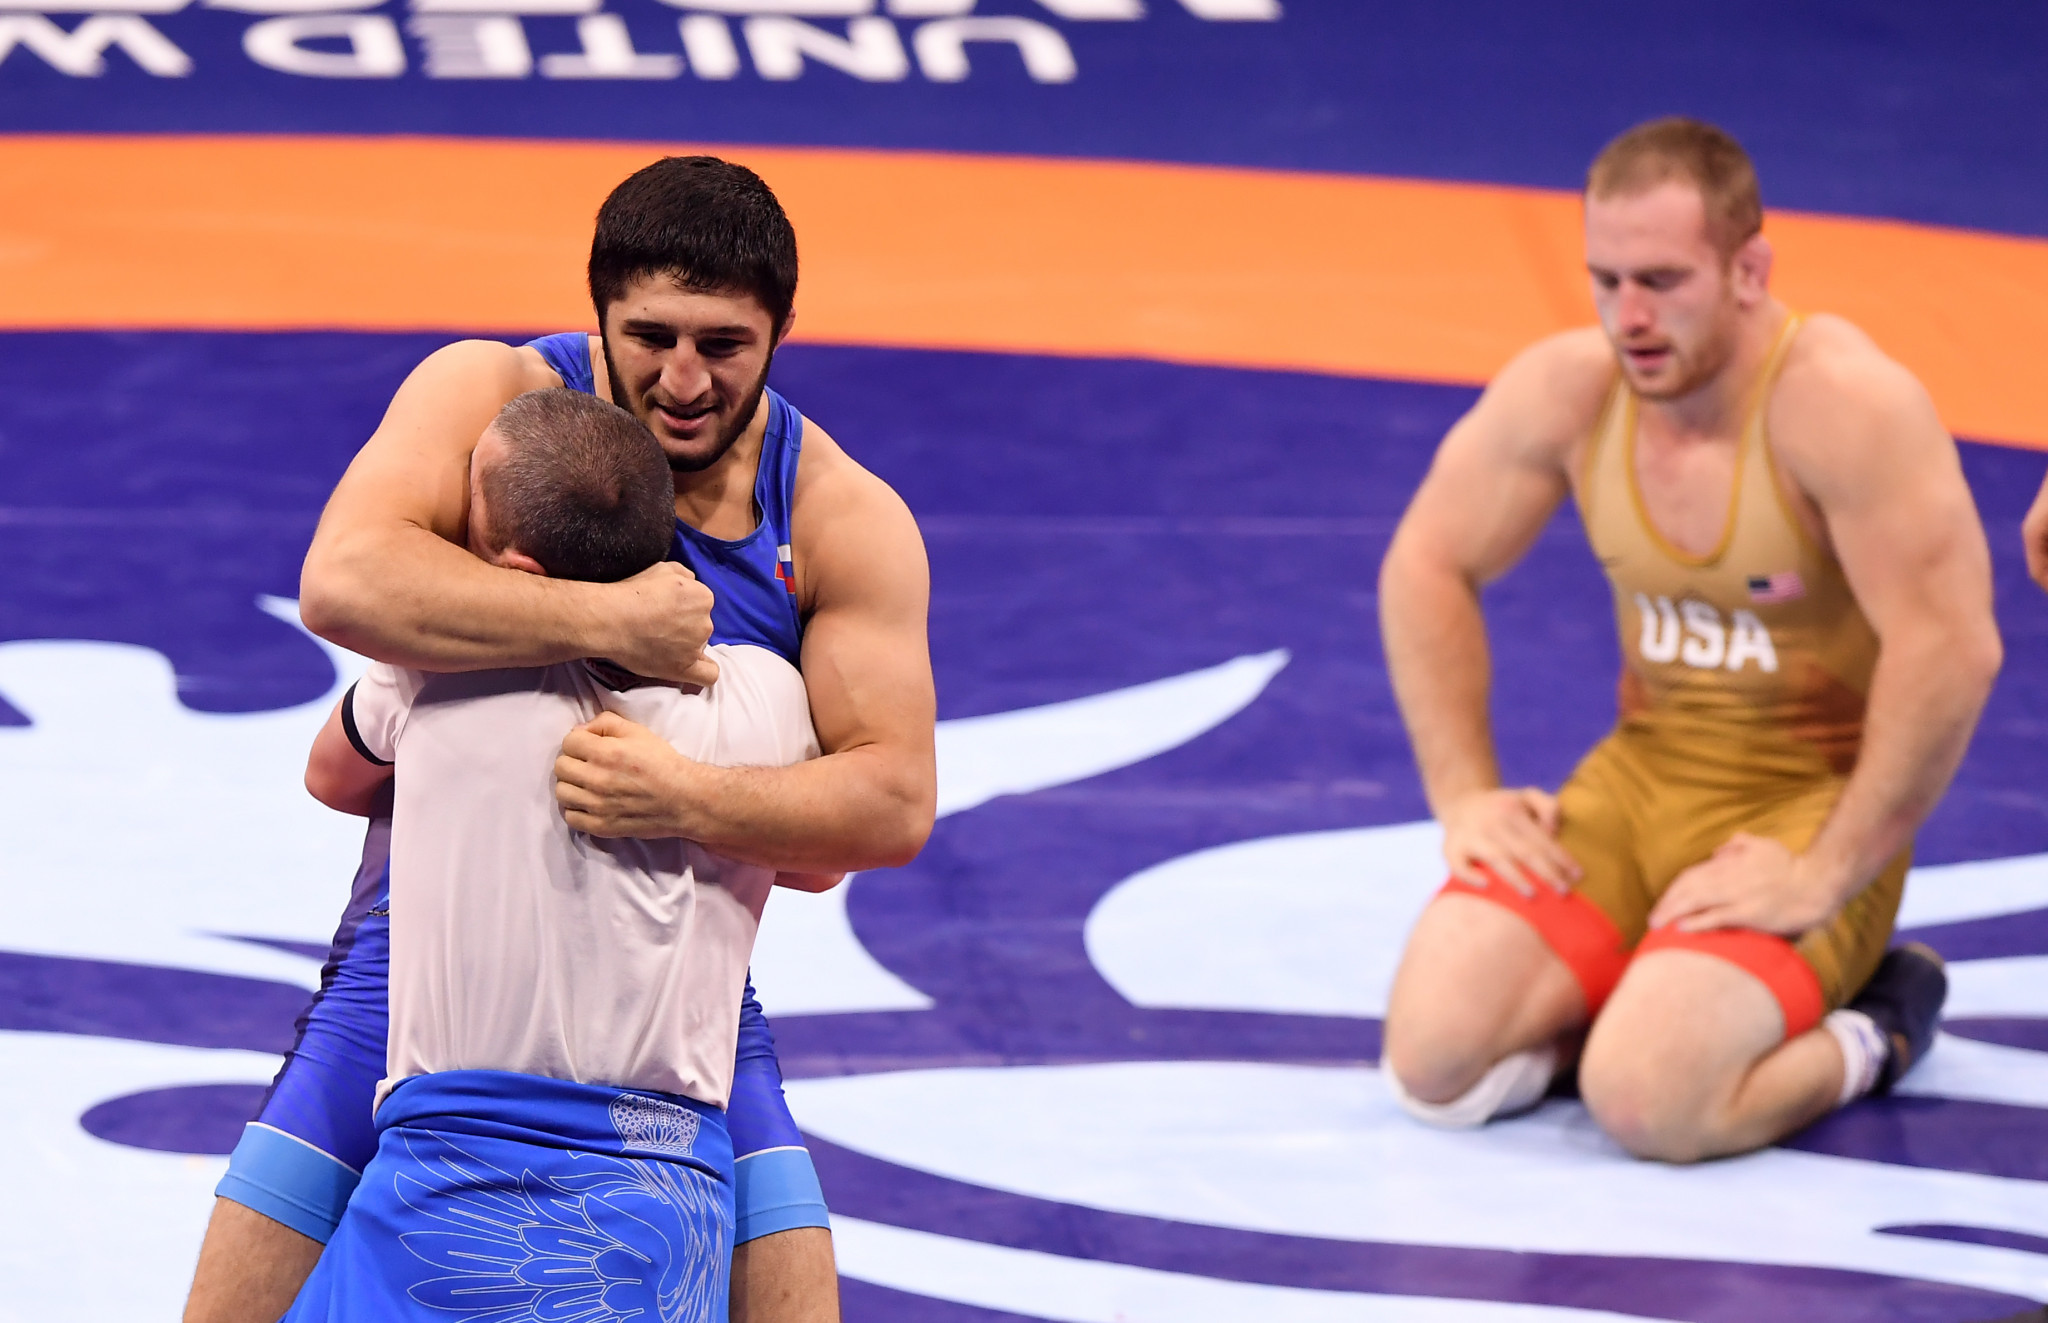  Sadulaev wins "rematch of the century" to claim 97kg gold at Wrestling World Championships